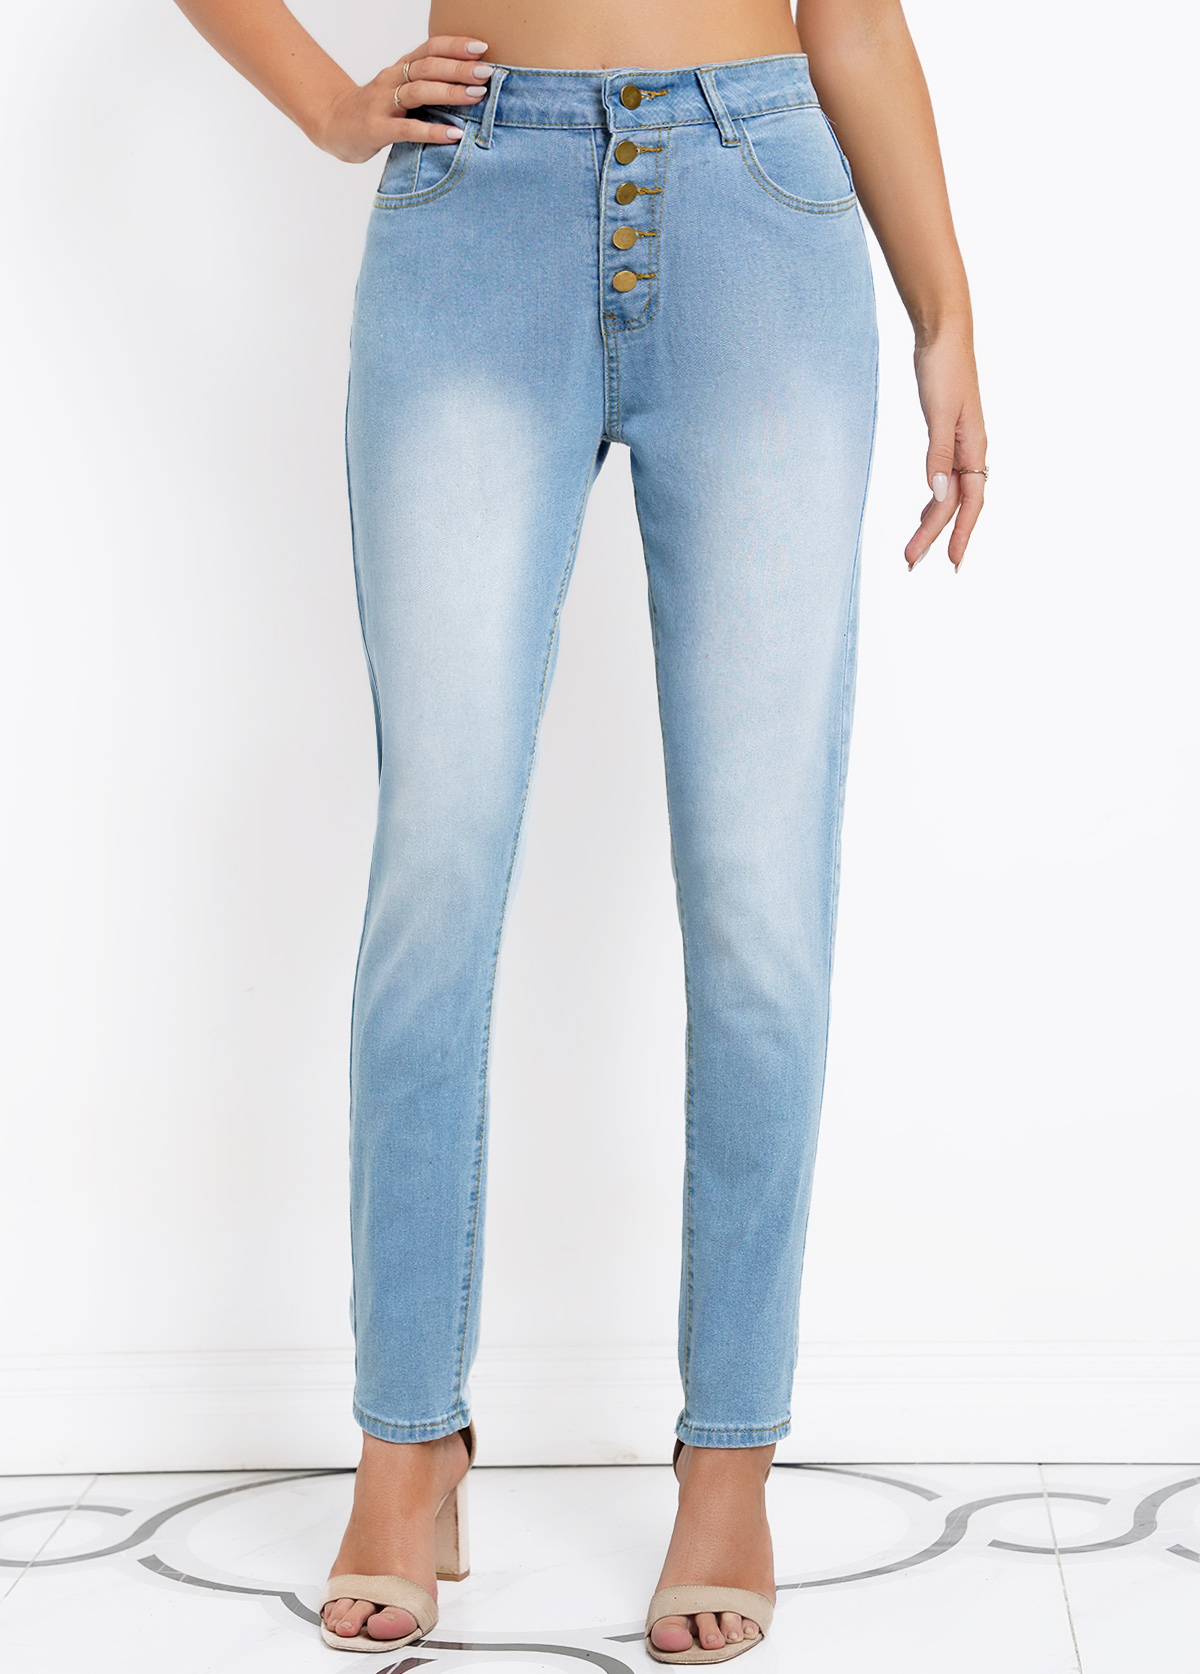 Denim Blue Skinny High Waisted Button Jeans